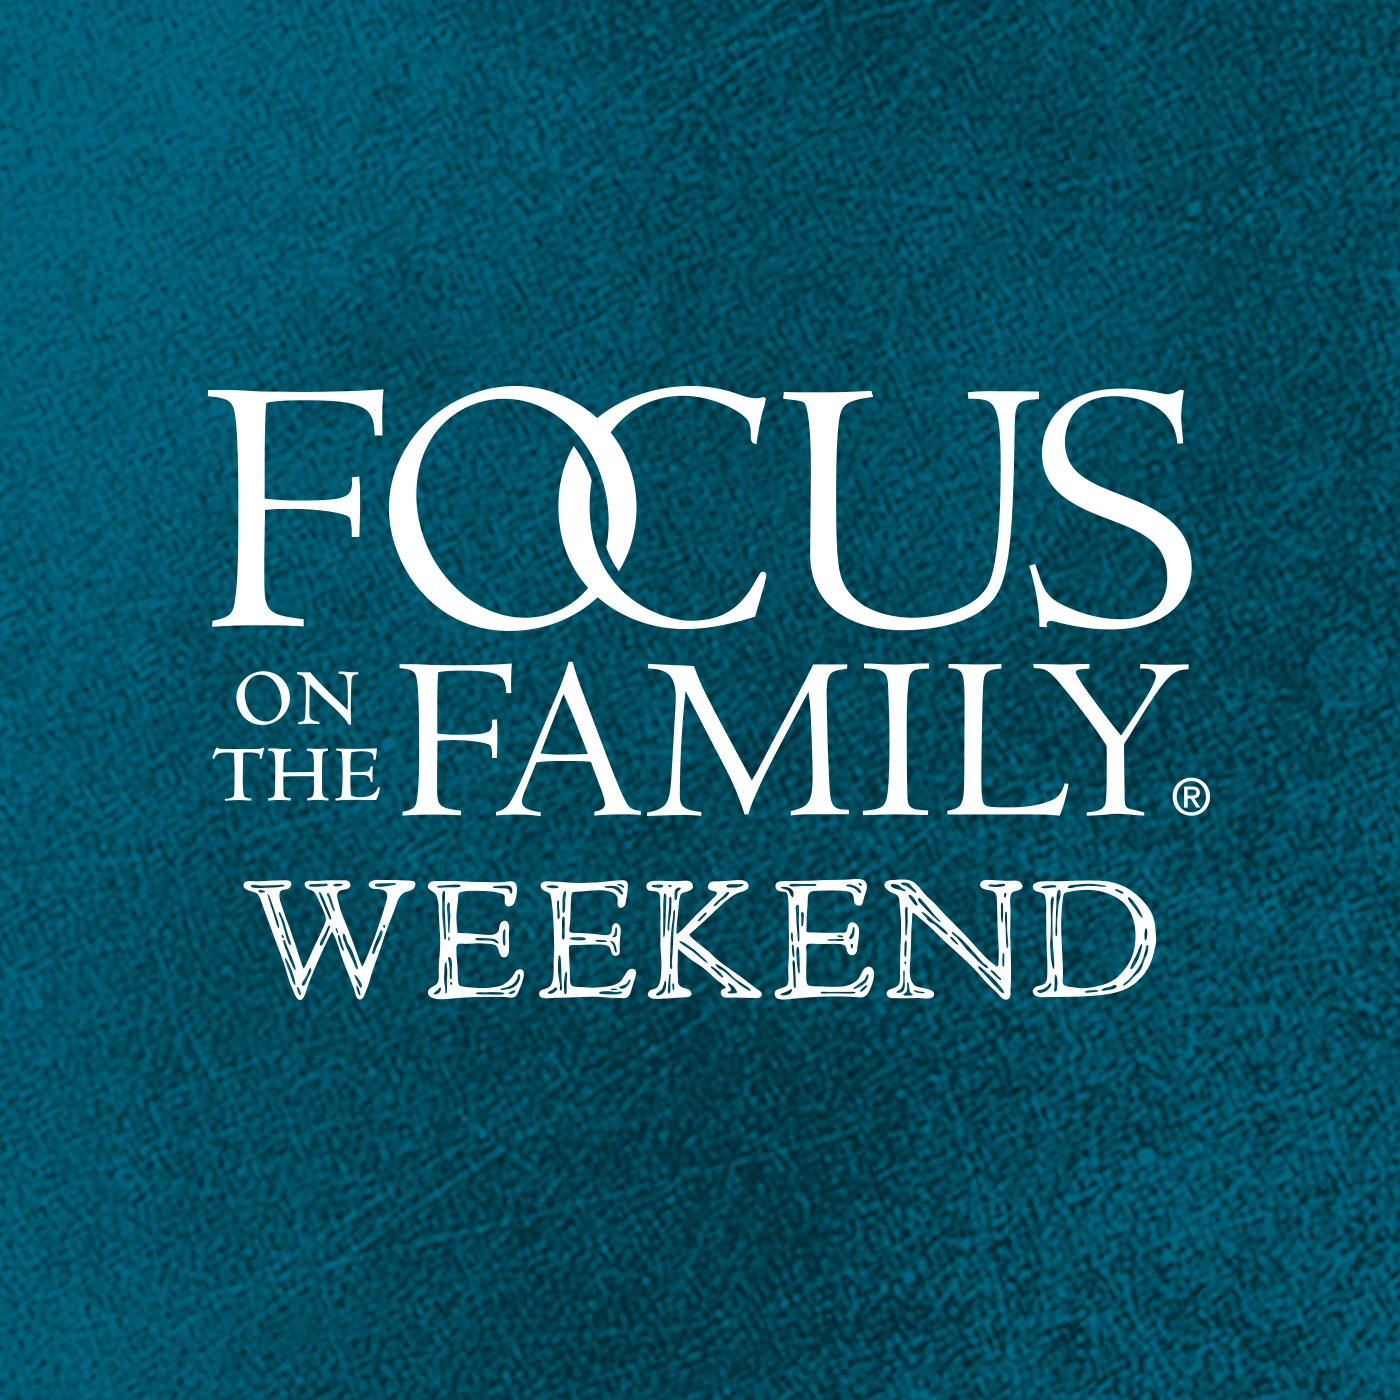 Focus on the Family Weekend: Aug. 06-07, 2022